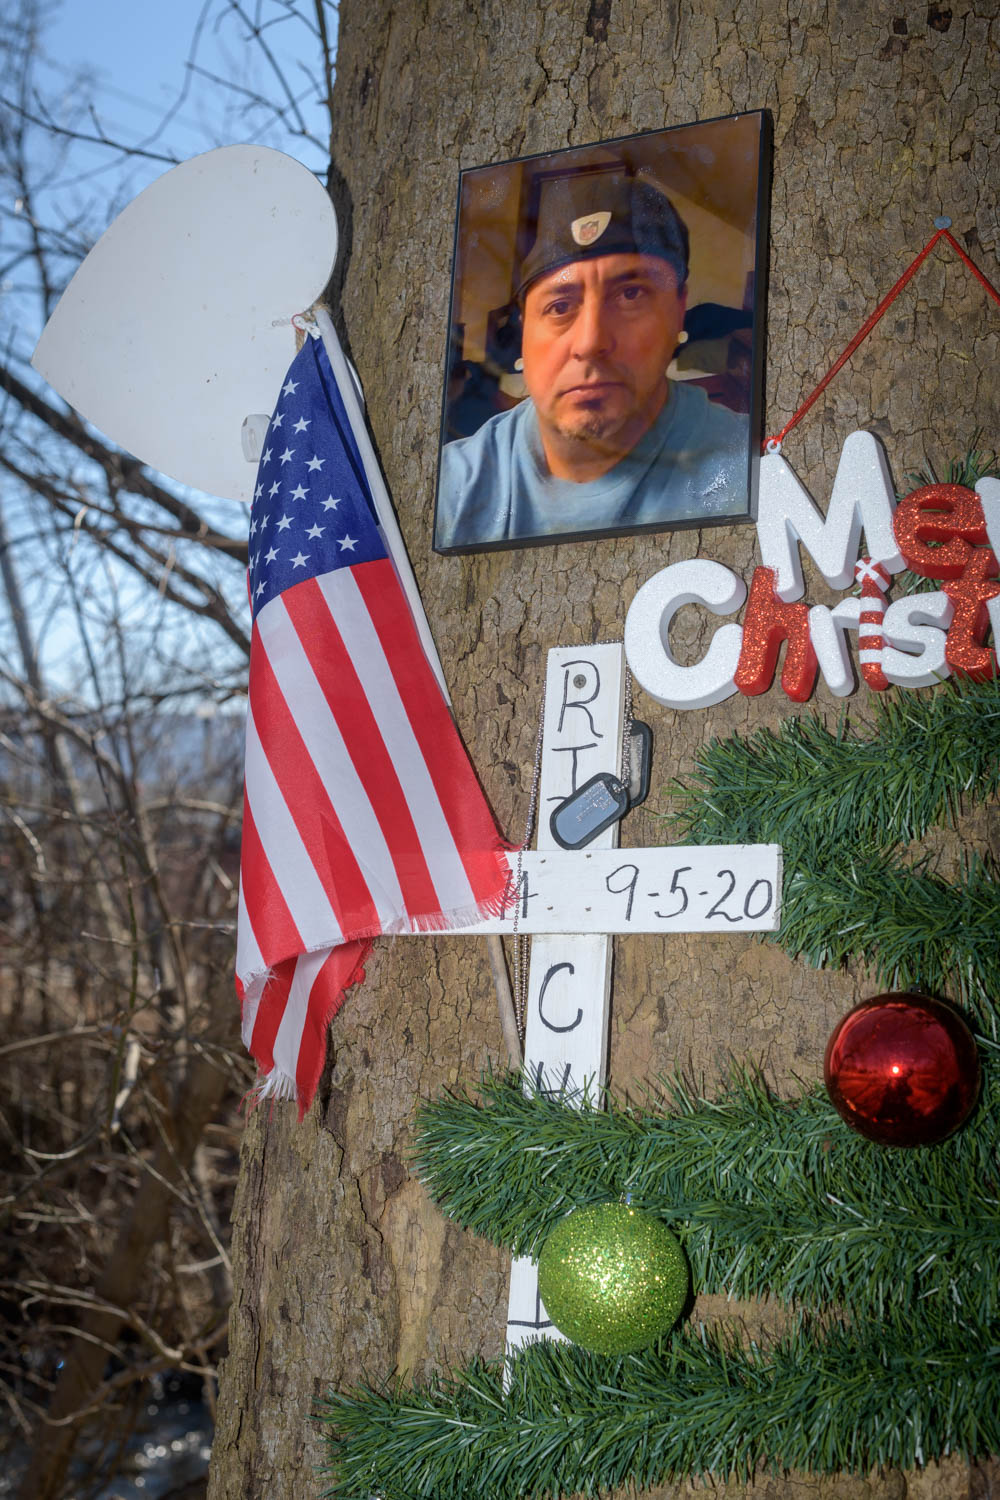 A memorial to Christopher Sharby, who died on the street in 2020, is on display in the so-called Peoples Park in Bennington, Vermont.